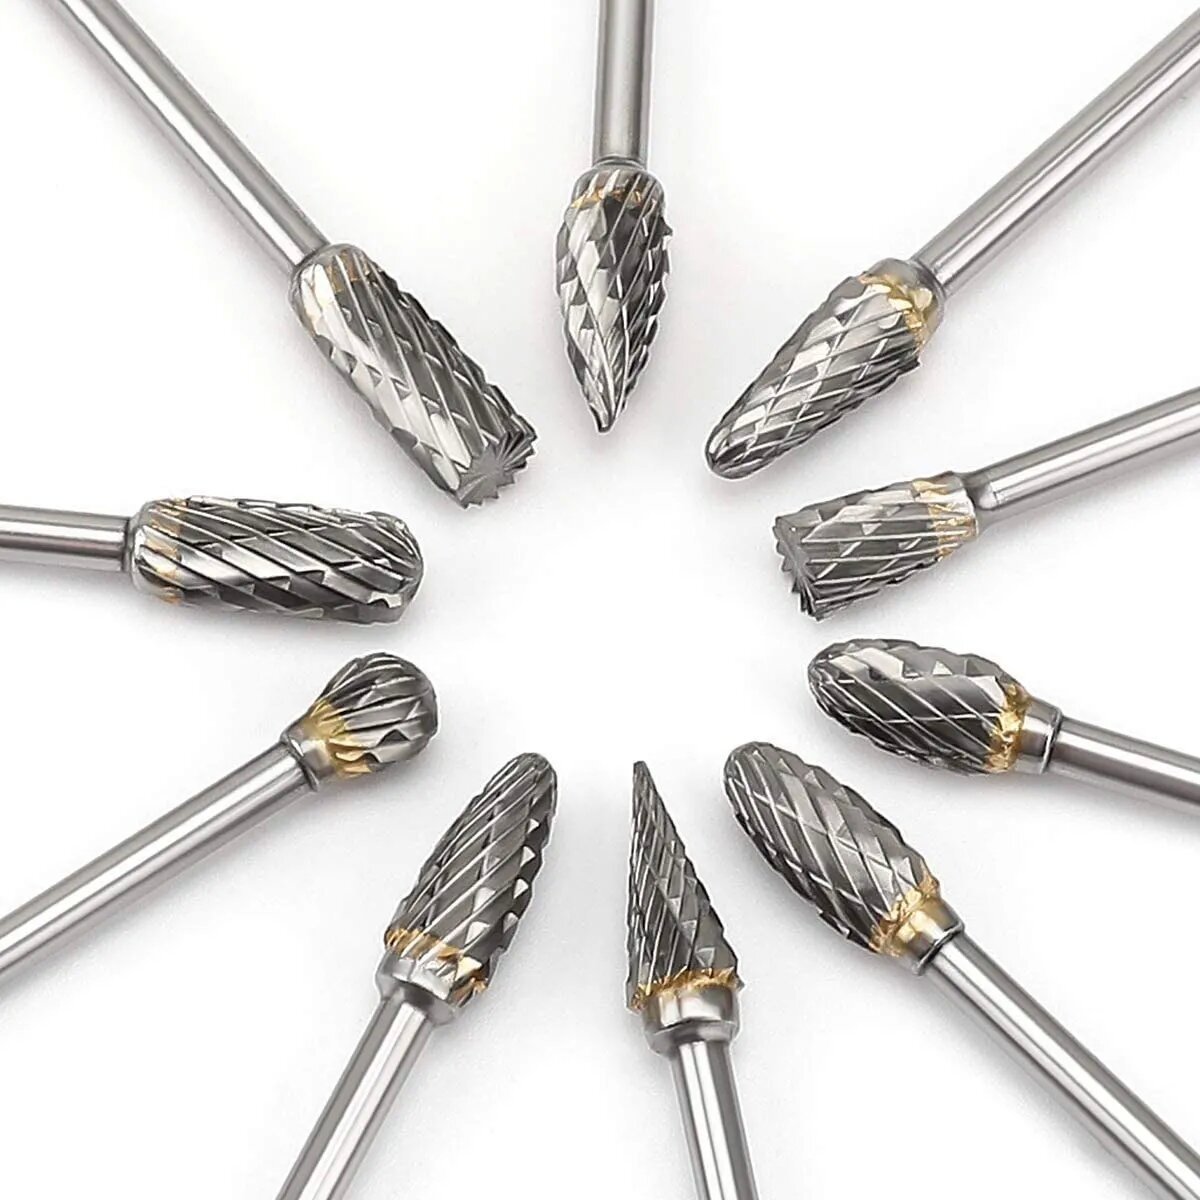 

10pcs Carbide Rotary Burr Set - Perfect For Woodworking, Drilling, Metal Carving, Engraving & Polishing!